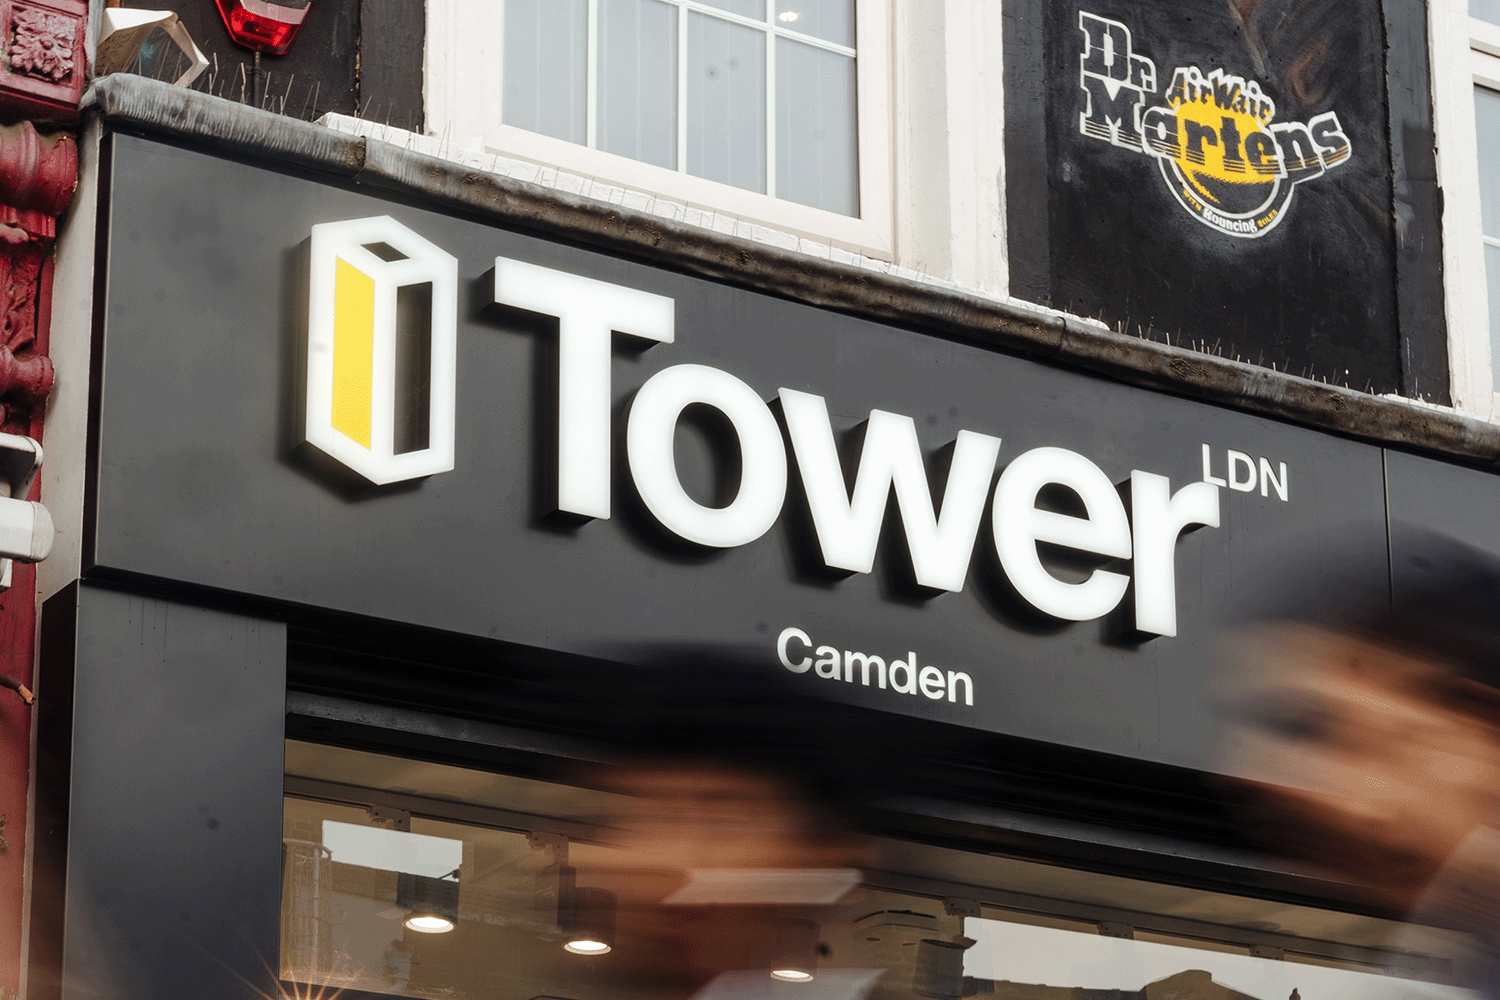 TOWER Family: You can't shop online, however our stores are open!